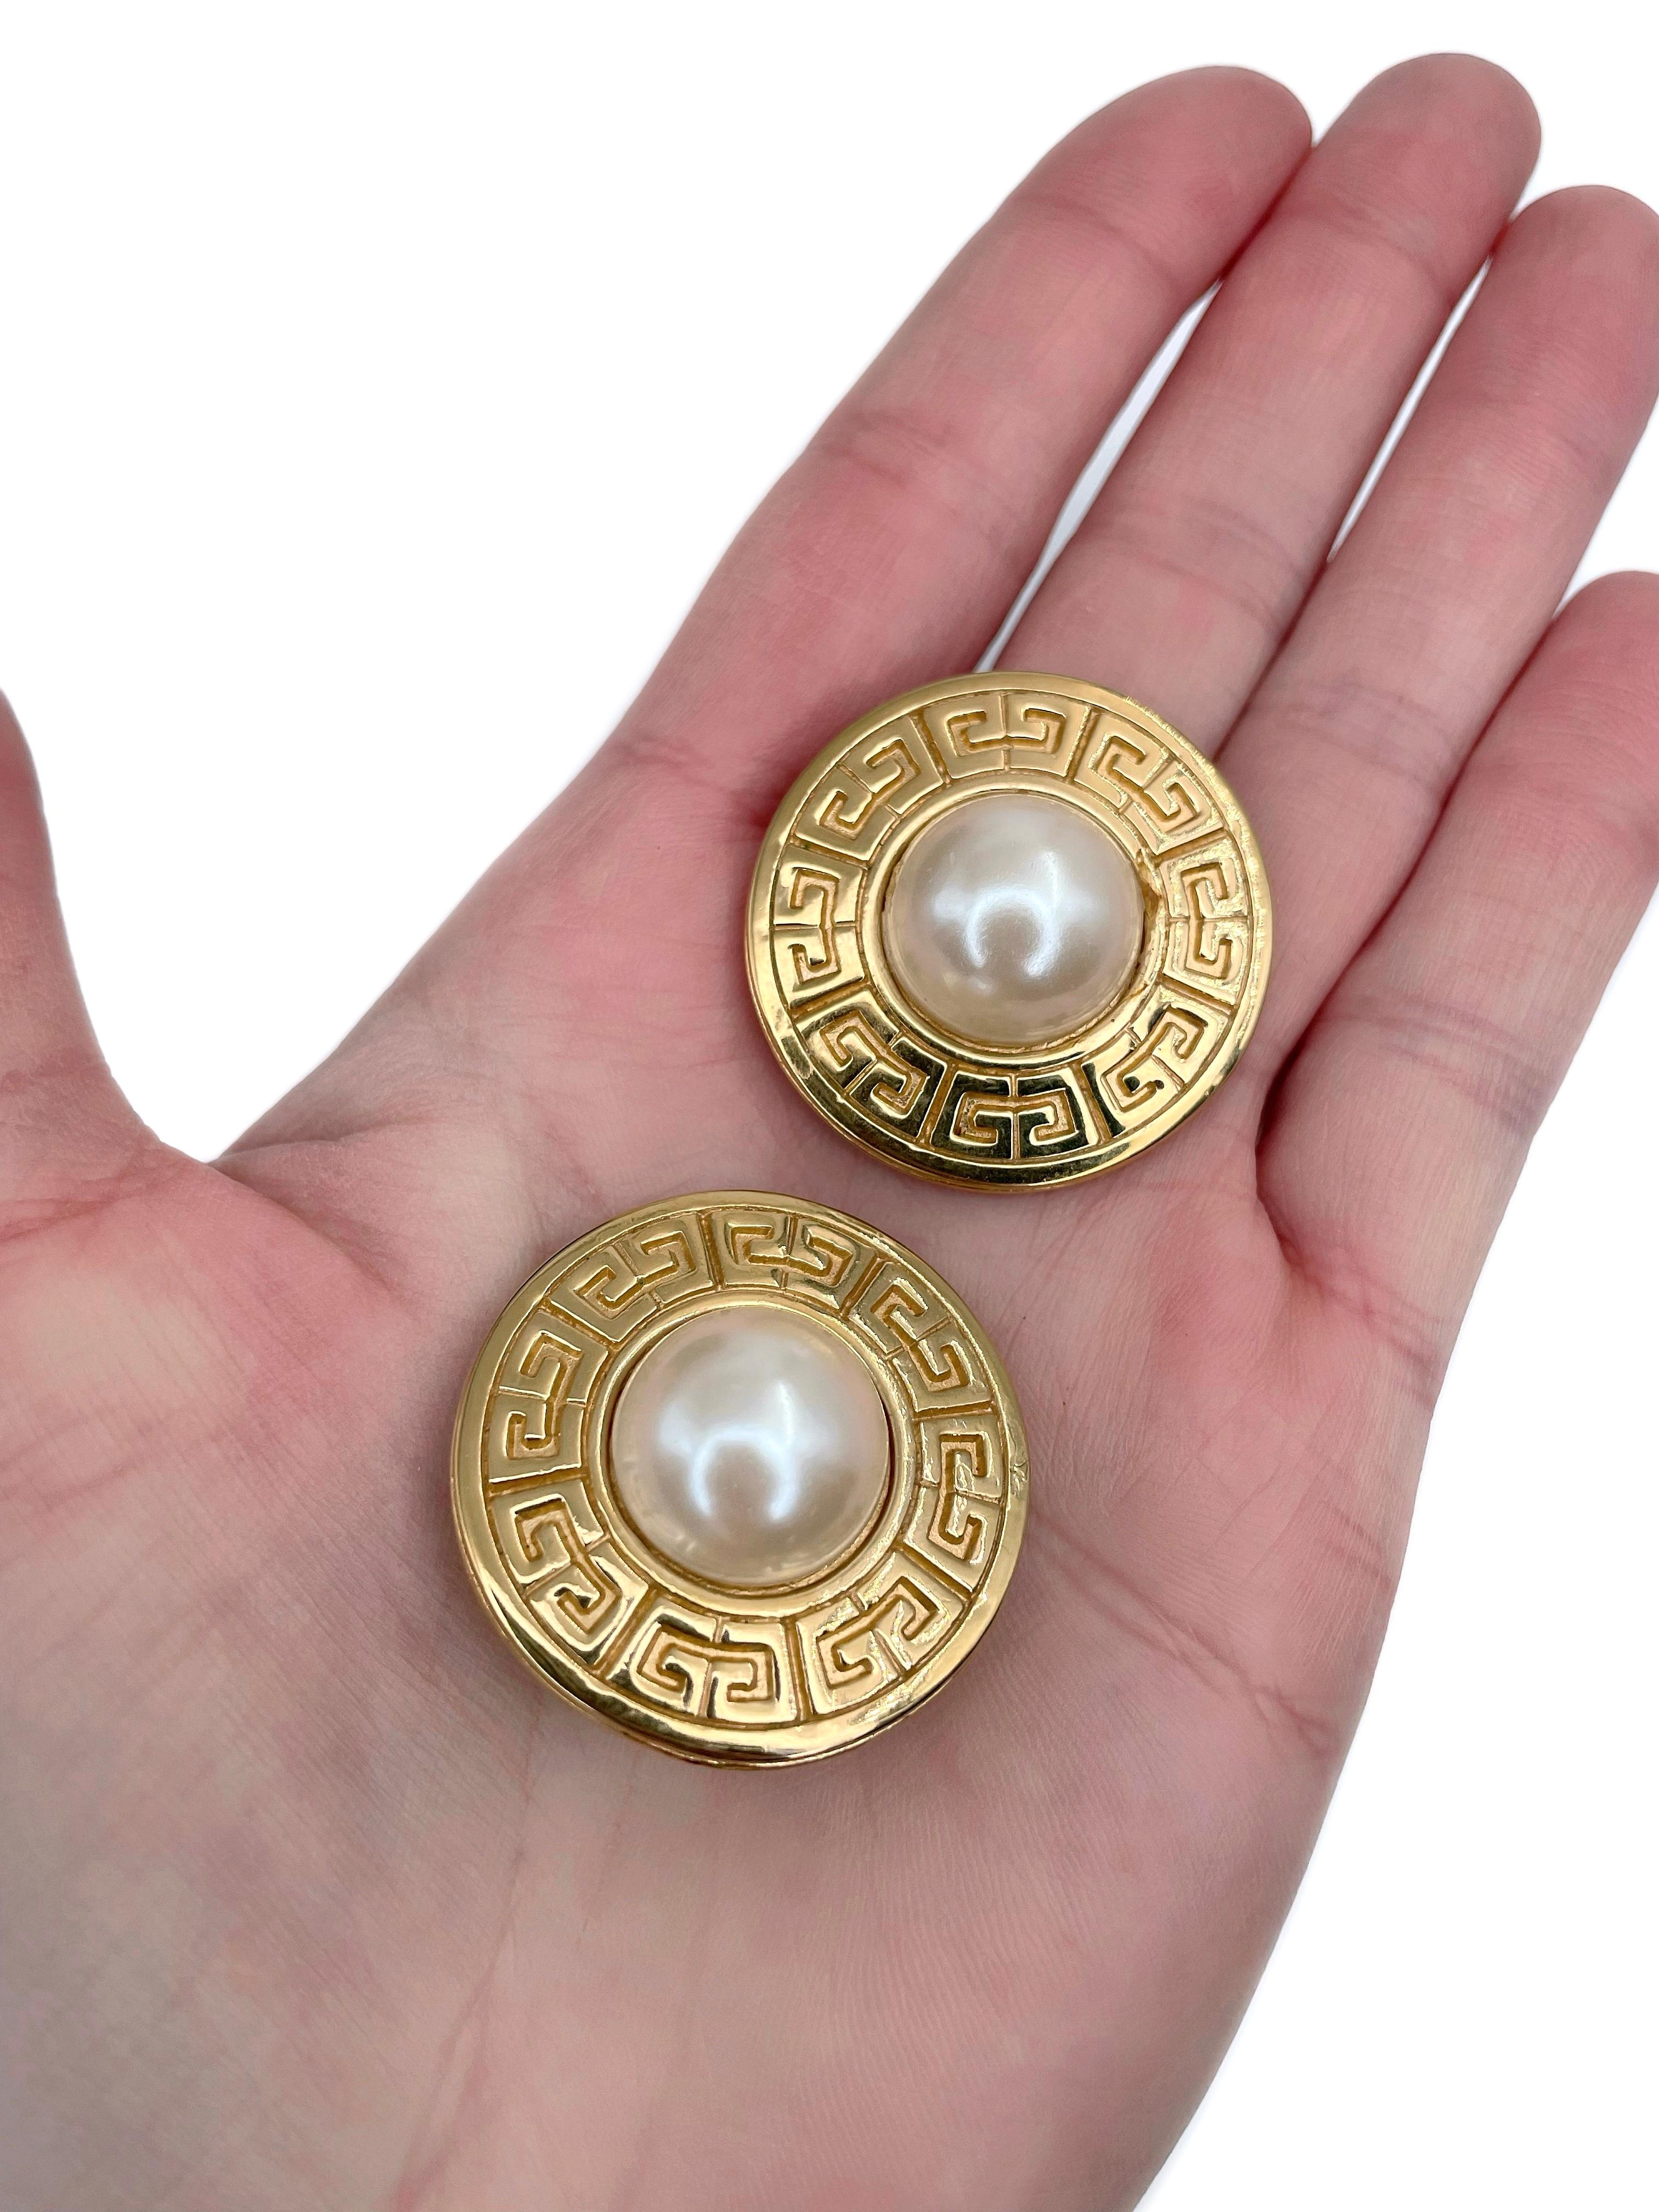 This is a pair of vintage round clip on earrings designed by Givenchy in 1980’s. 

The piece is crafted in gold tone base metal. It features faux pearls. 

Signed: 